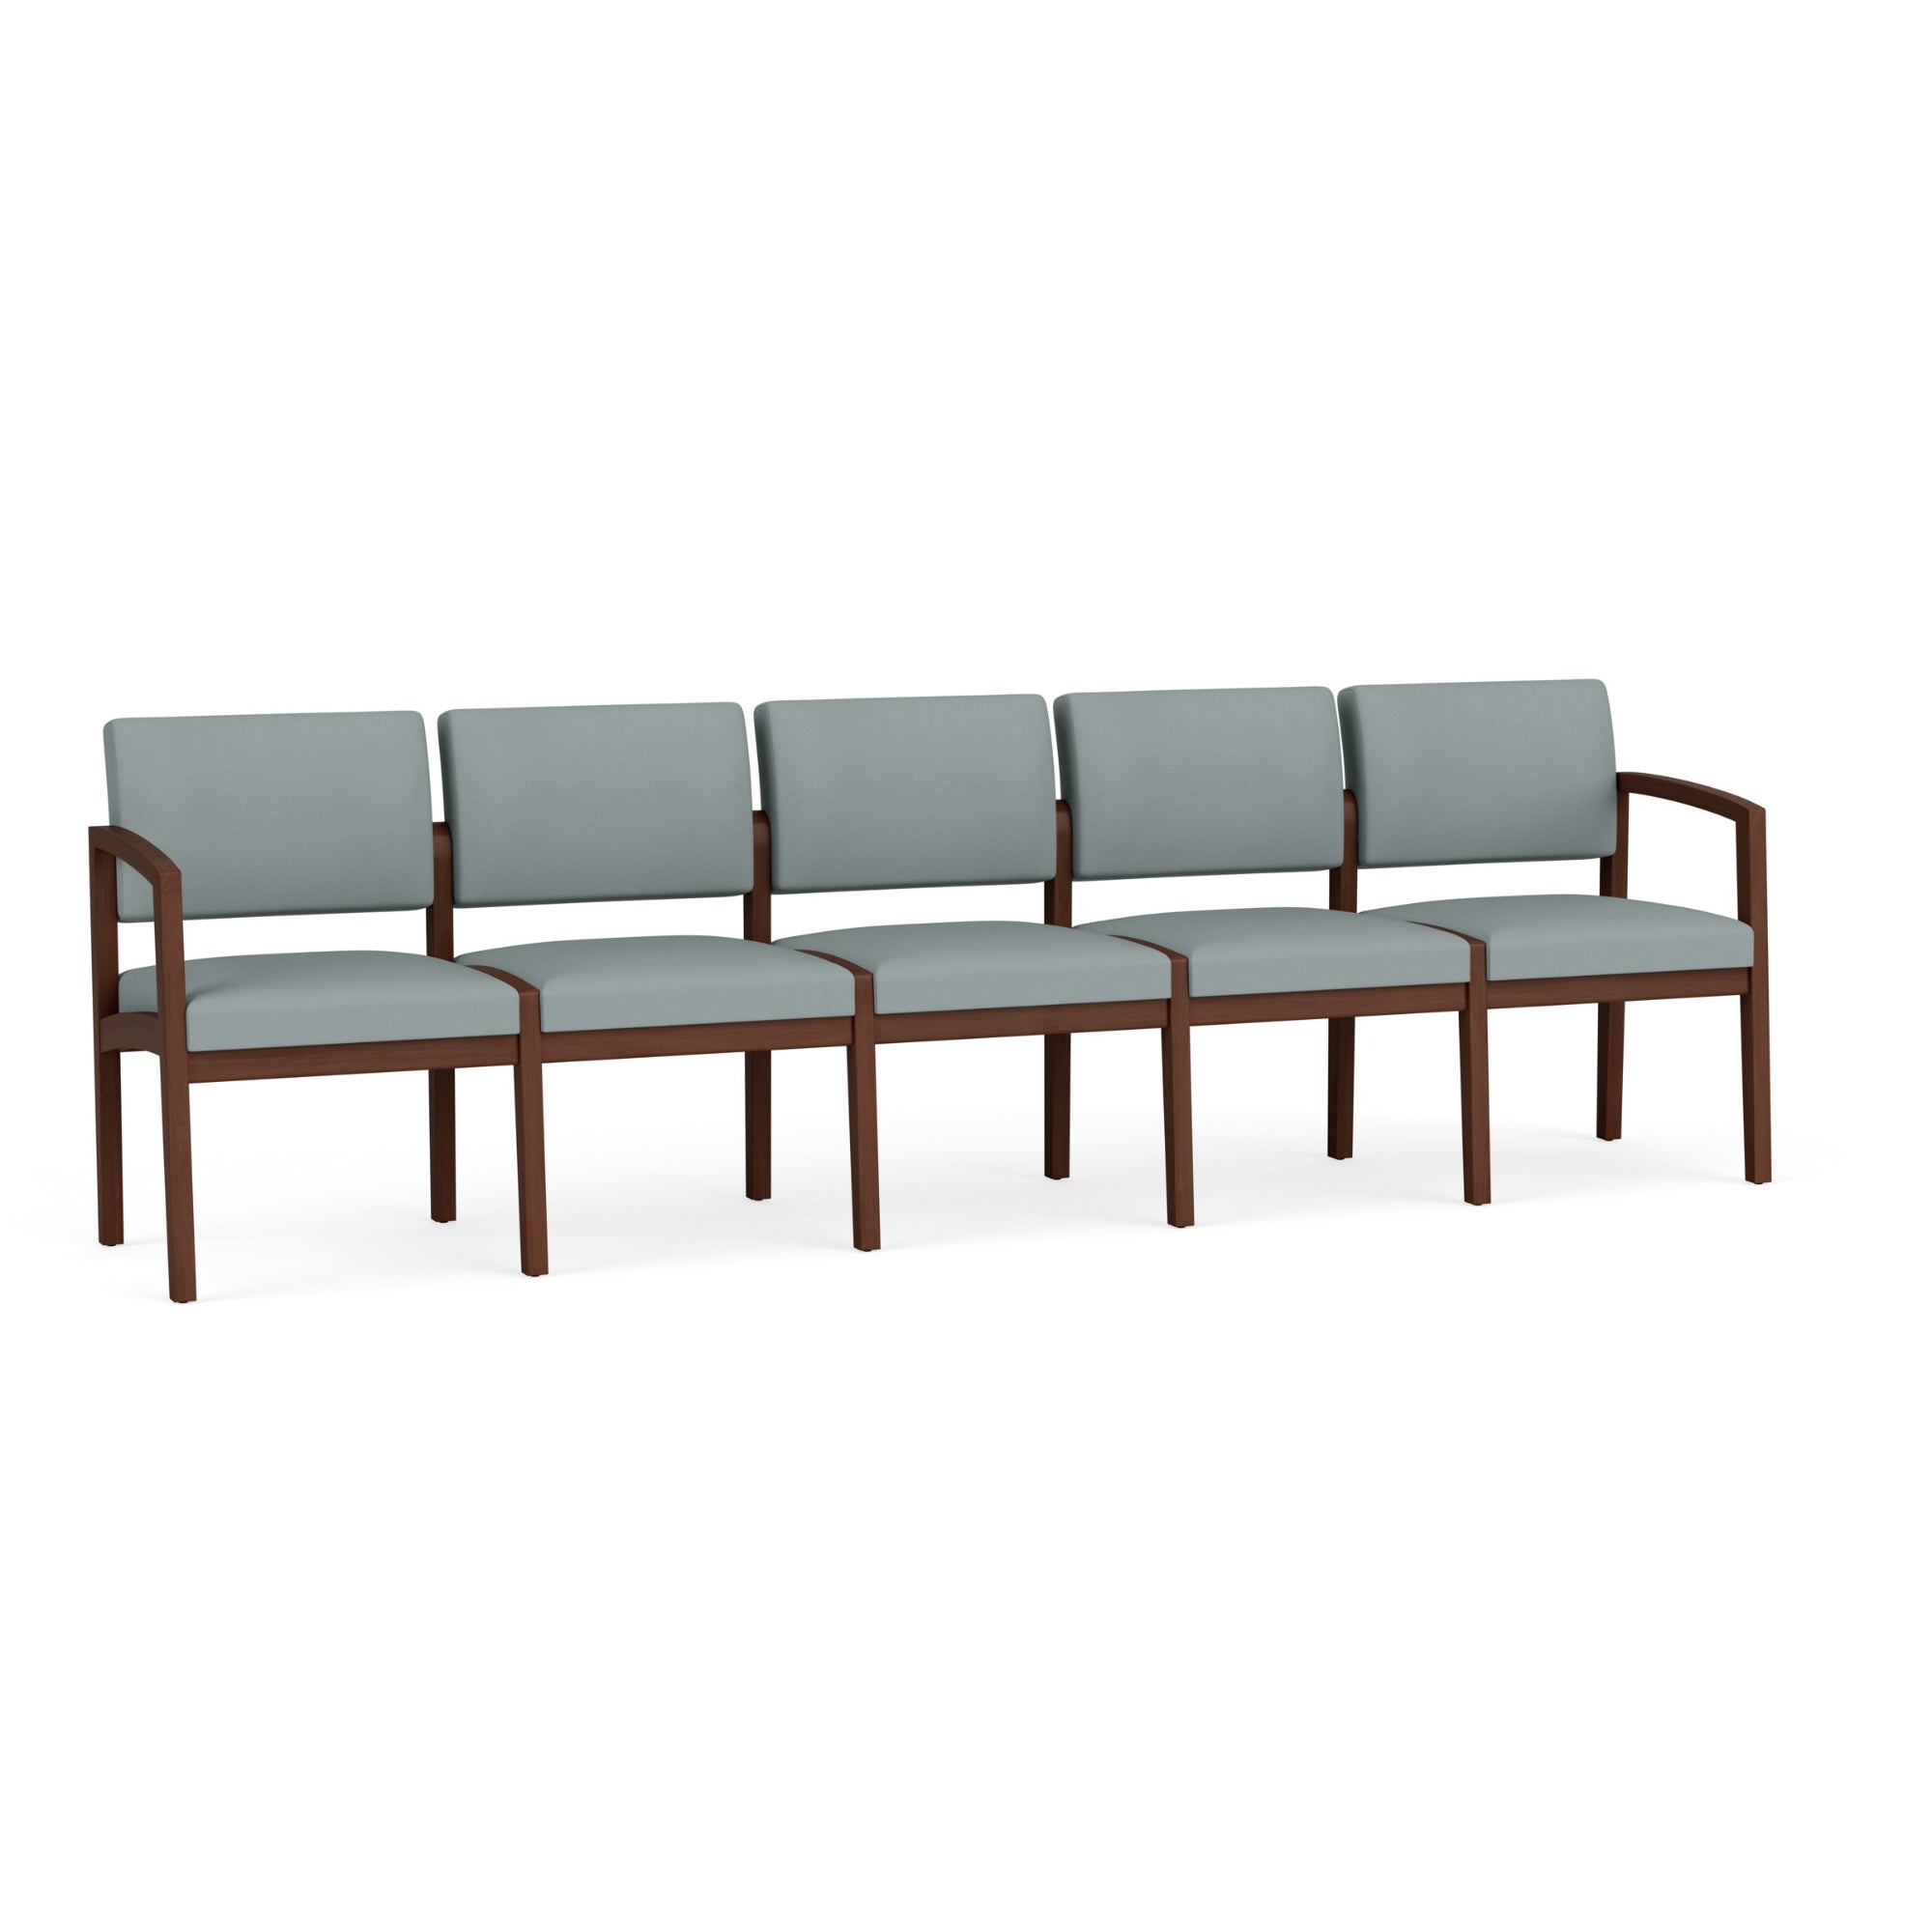 Lenox Wood Collection Reception Seating, 5 Seat Sofa, Designer Fabric Upholstery, FREE SHIPPING